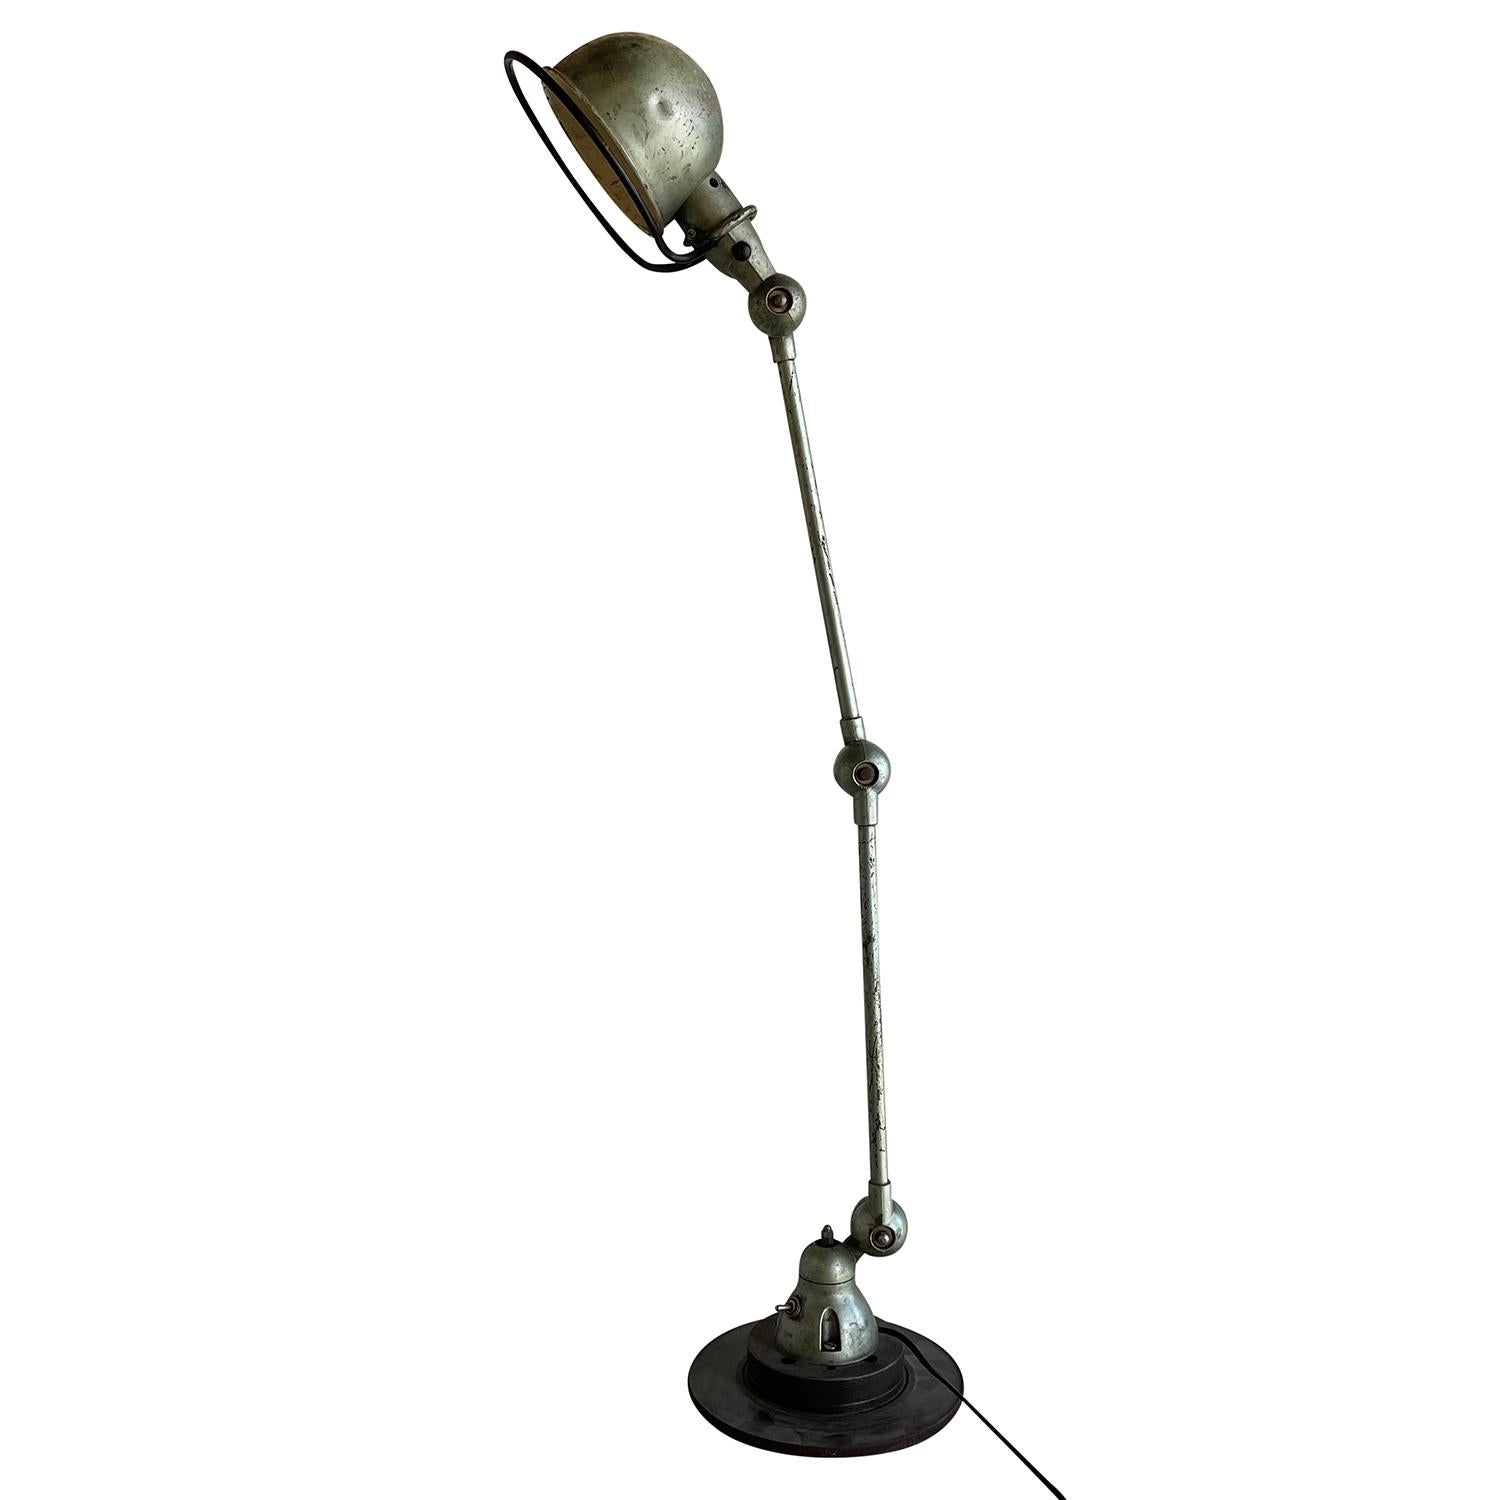 A metallic-green, vintage Mid-Century Modern French desk light made of hand crafted metal, designed by Jean Louis Domecq and produced by Jielde, in good condition. The Industrial car brake, table lamp is composed with two adjustable arms, featuring